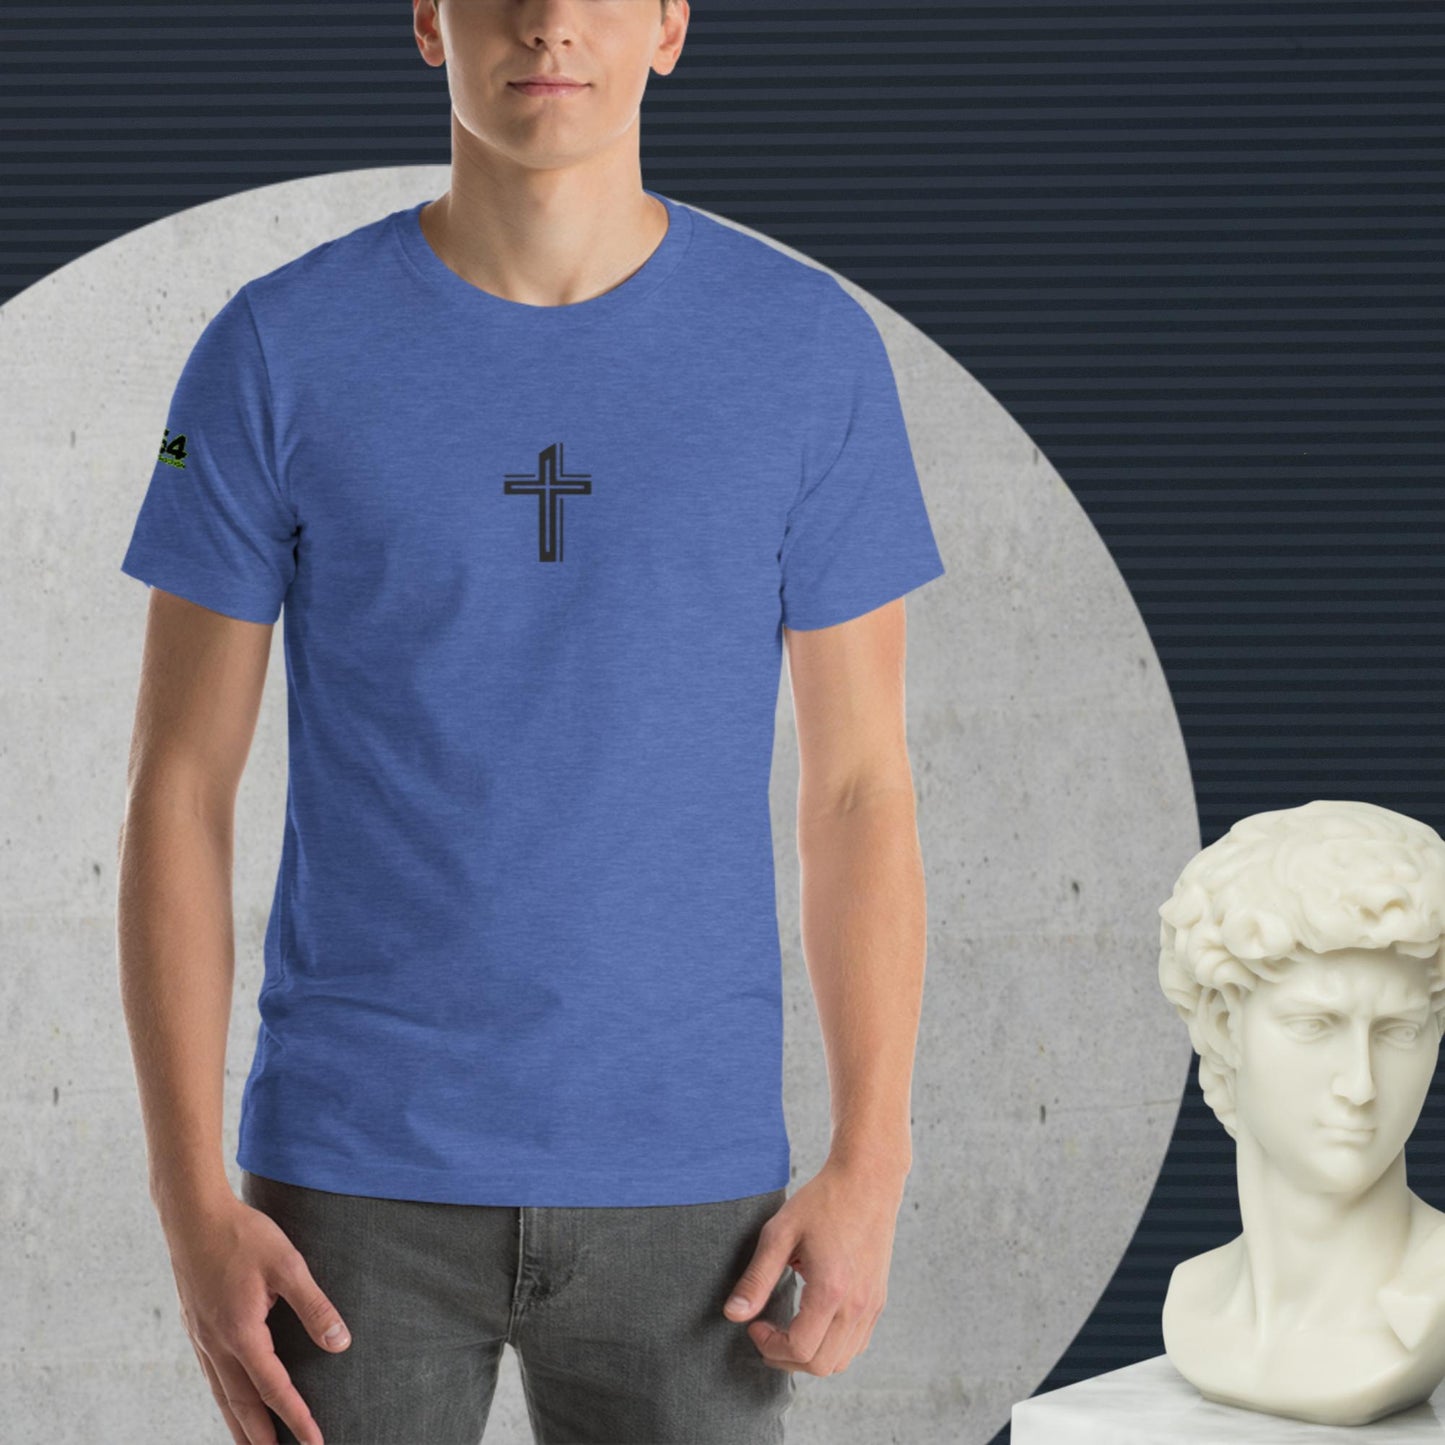 Franciscan 954 Collection Unisex t-shirt